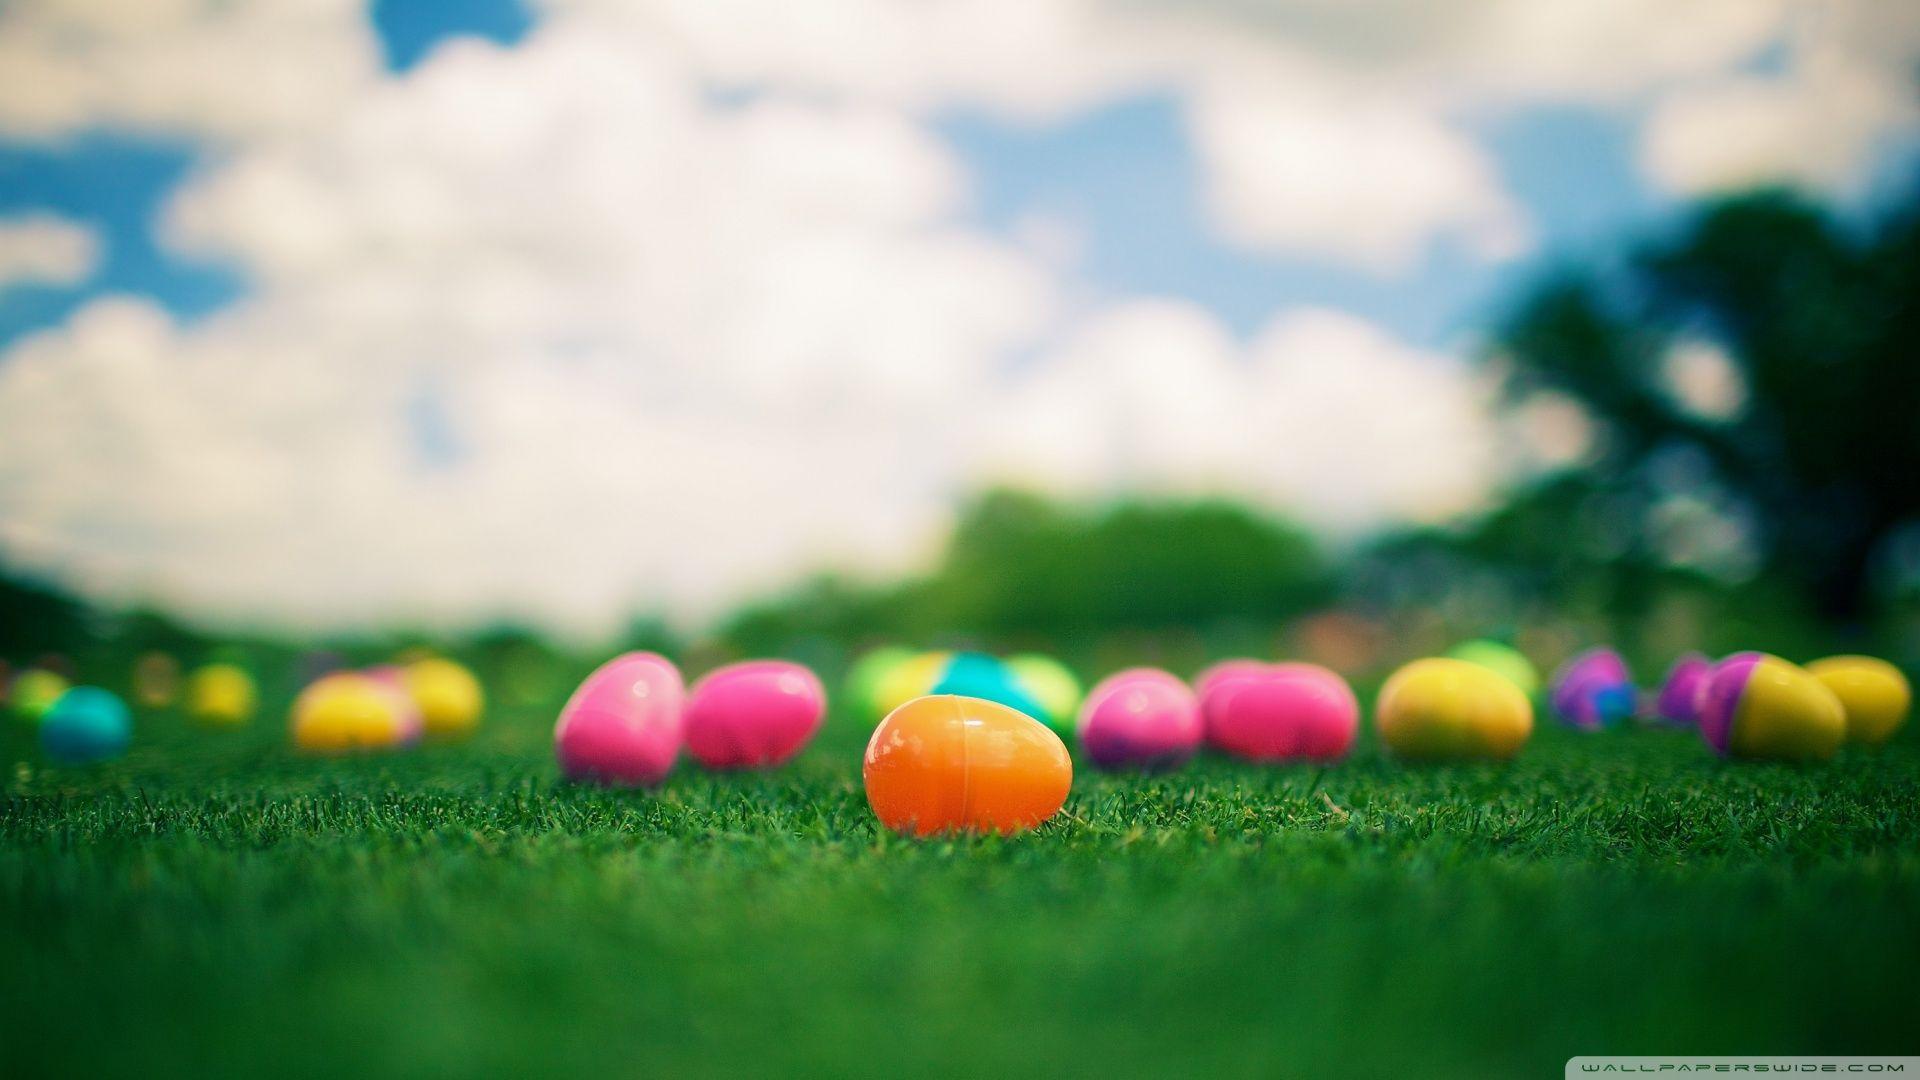 Download Painted Easter Eggs Wallpaper 1920x1080 #